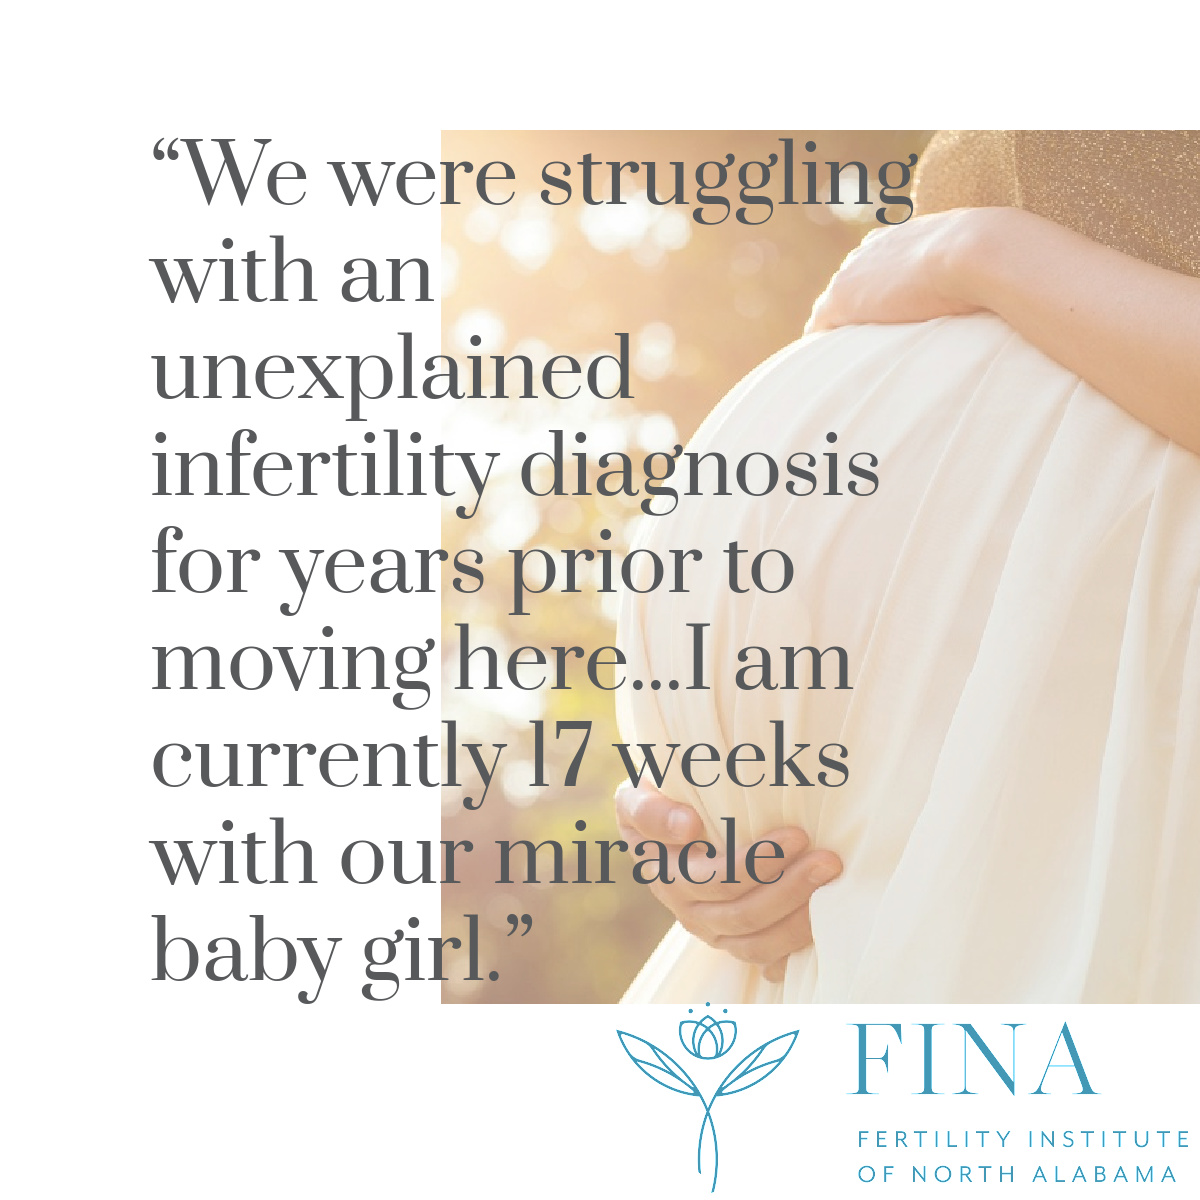 “We were struggling with an unexplained infertility diagnosis…” #myFINAstory